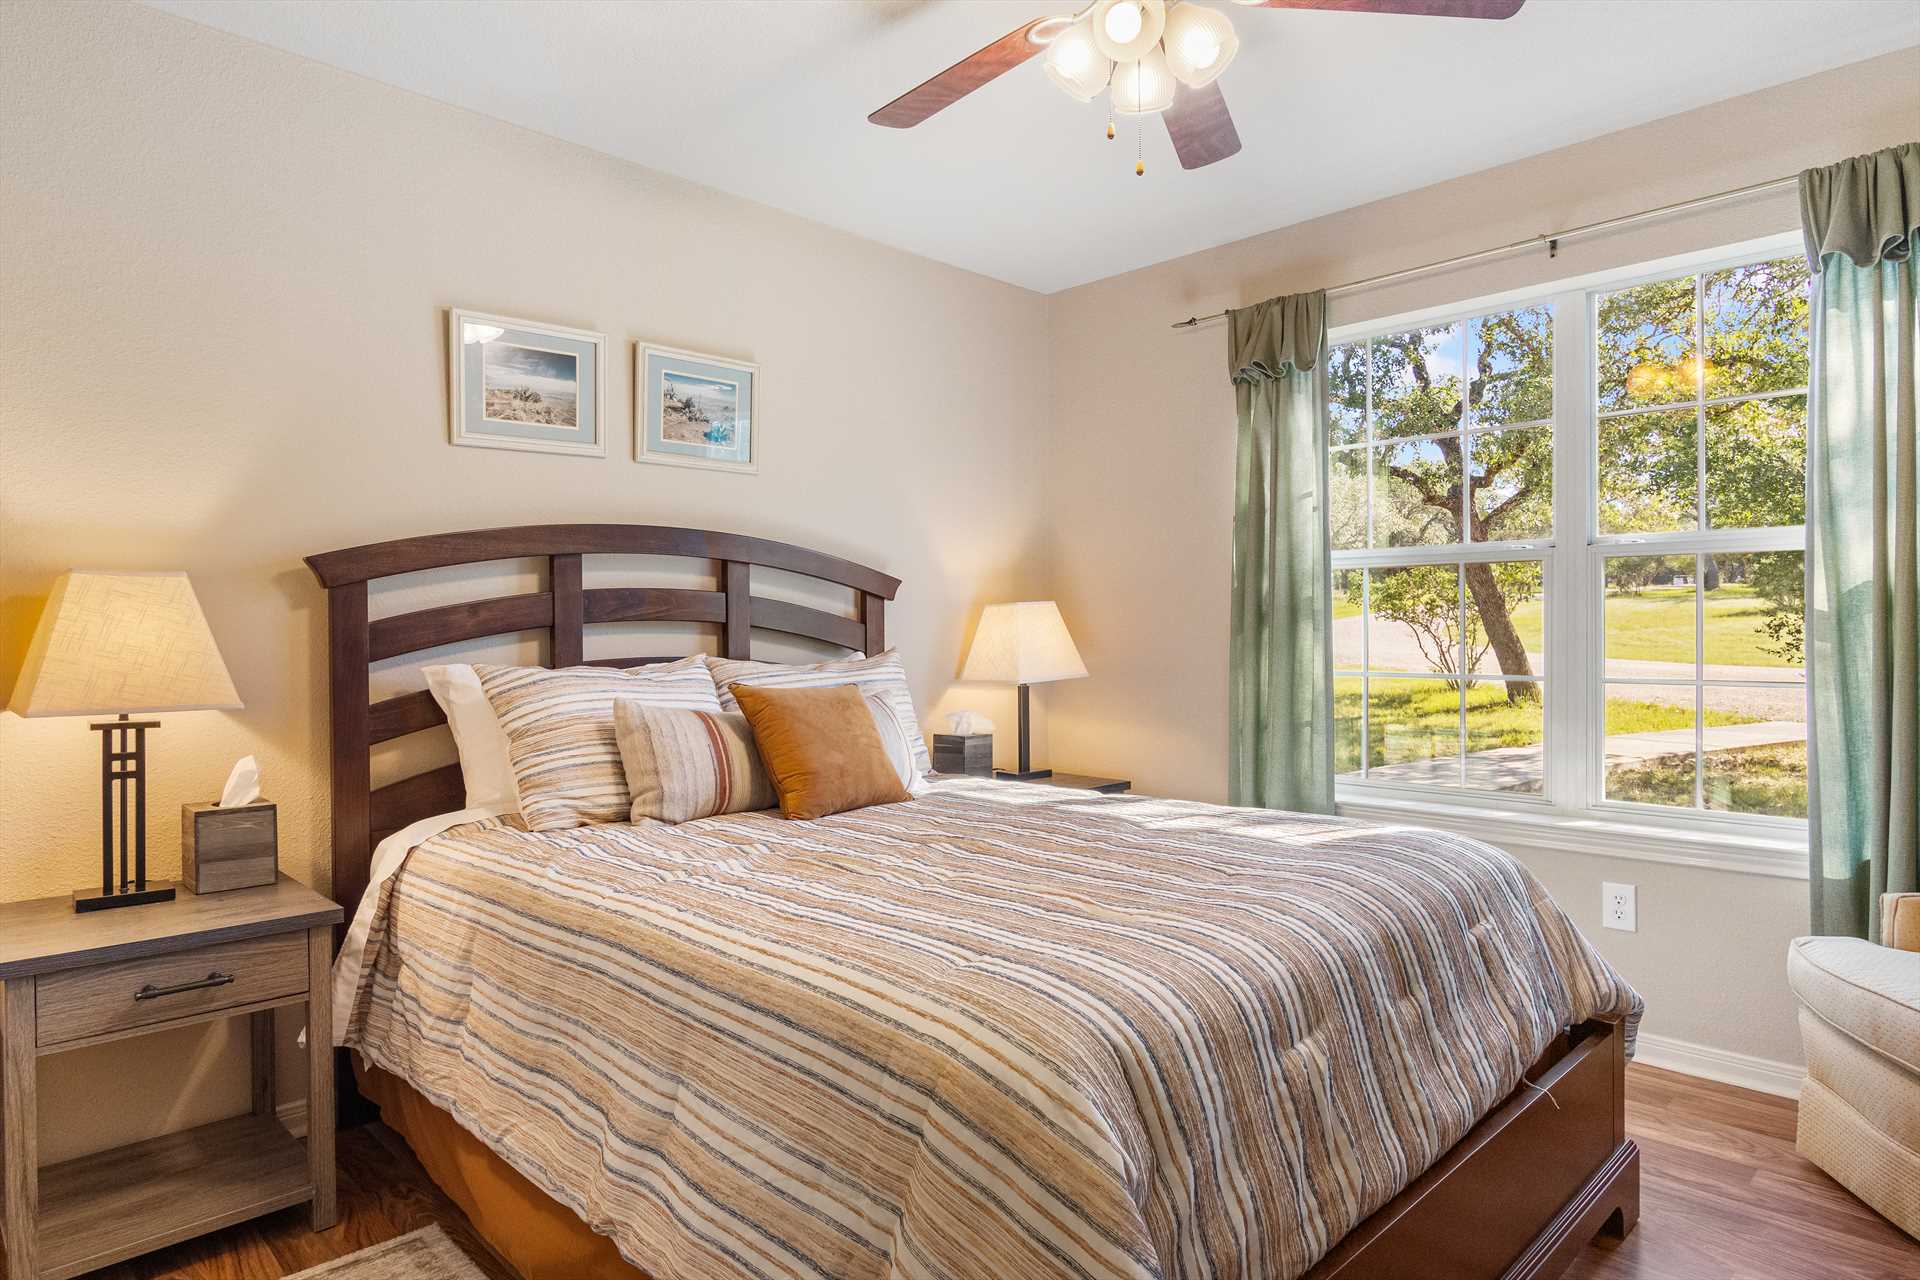                                                 A restful and comfy queen-sized bed is the centerpiece of the second bedroom, and all sleeping spaces at the Retreat include clean linens!